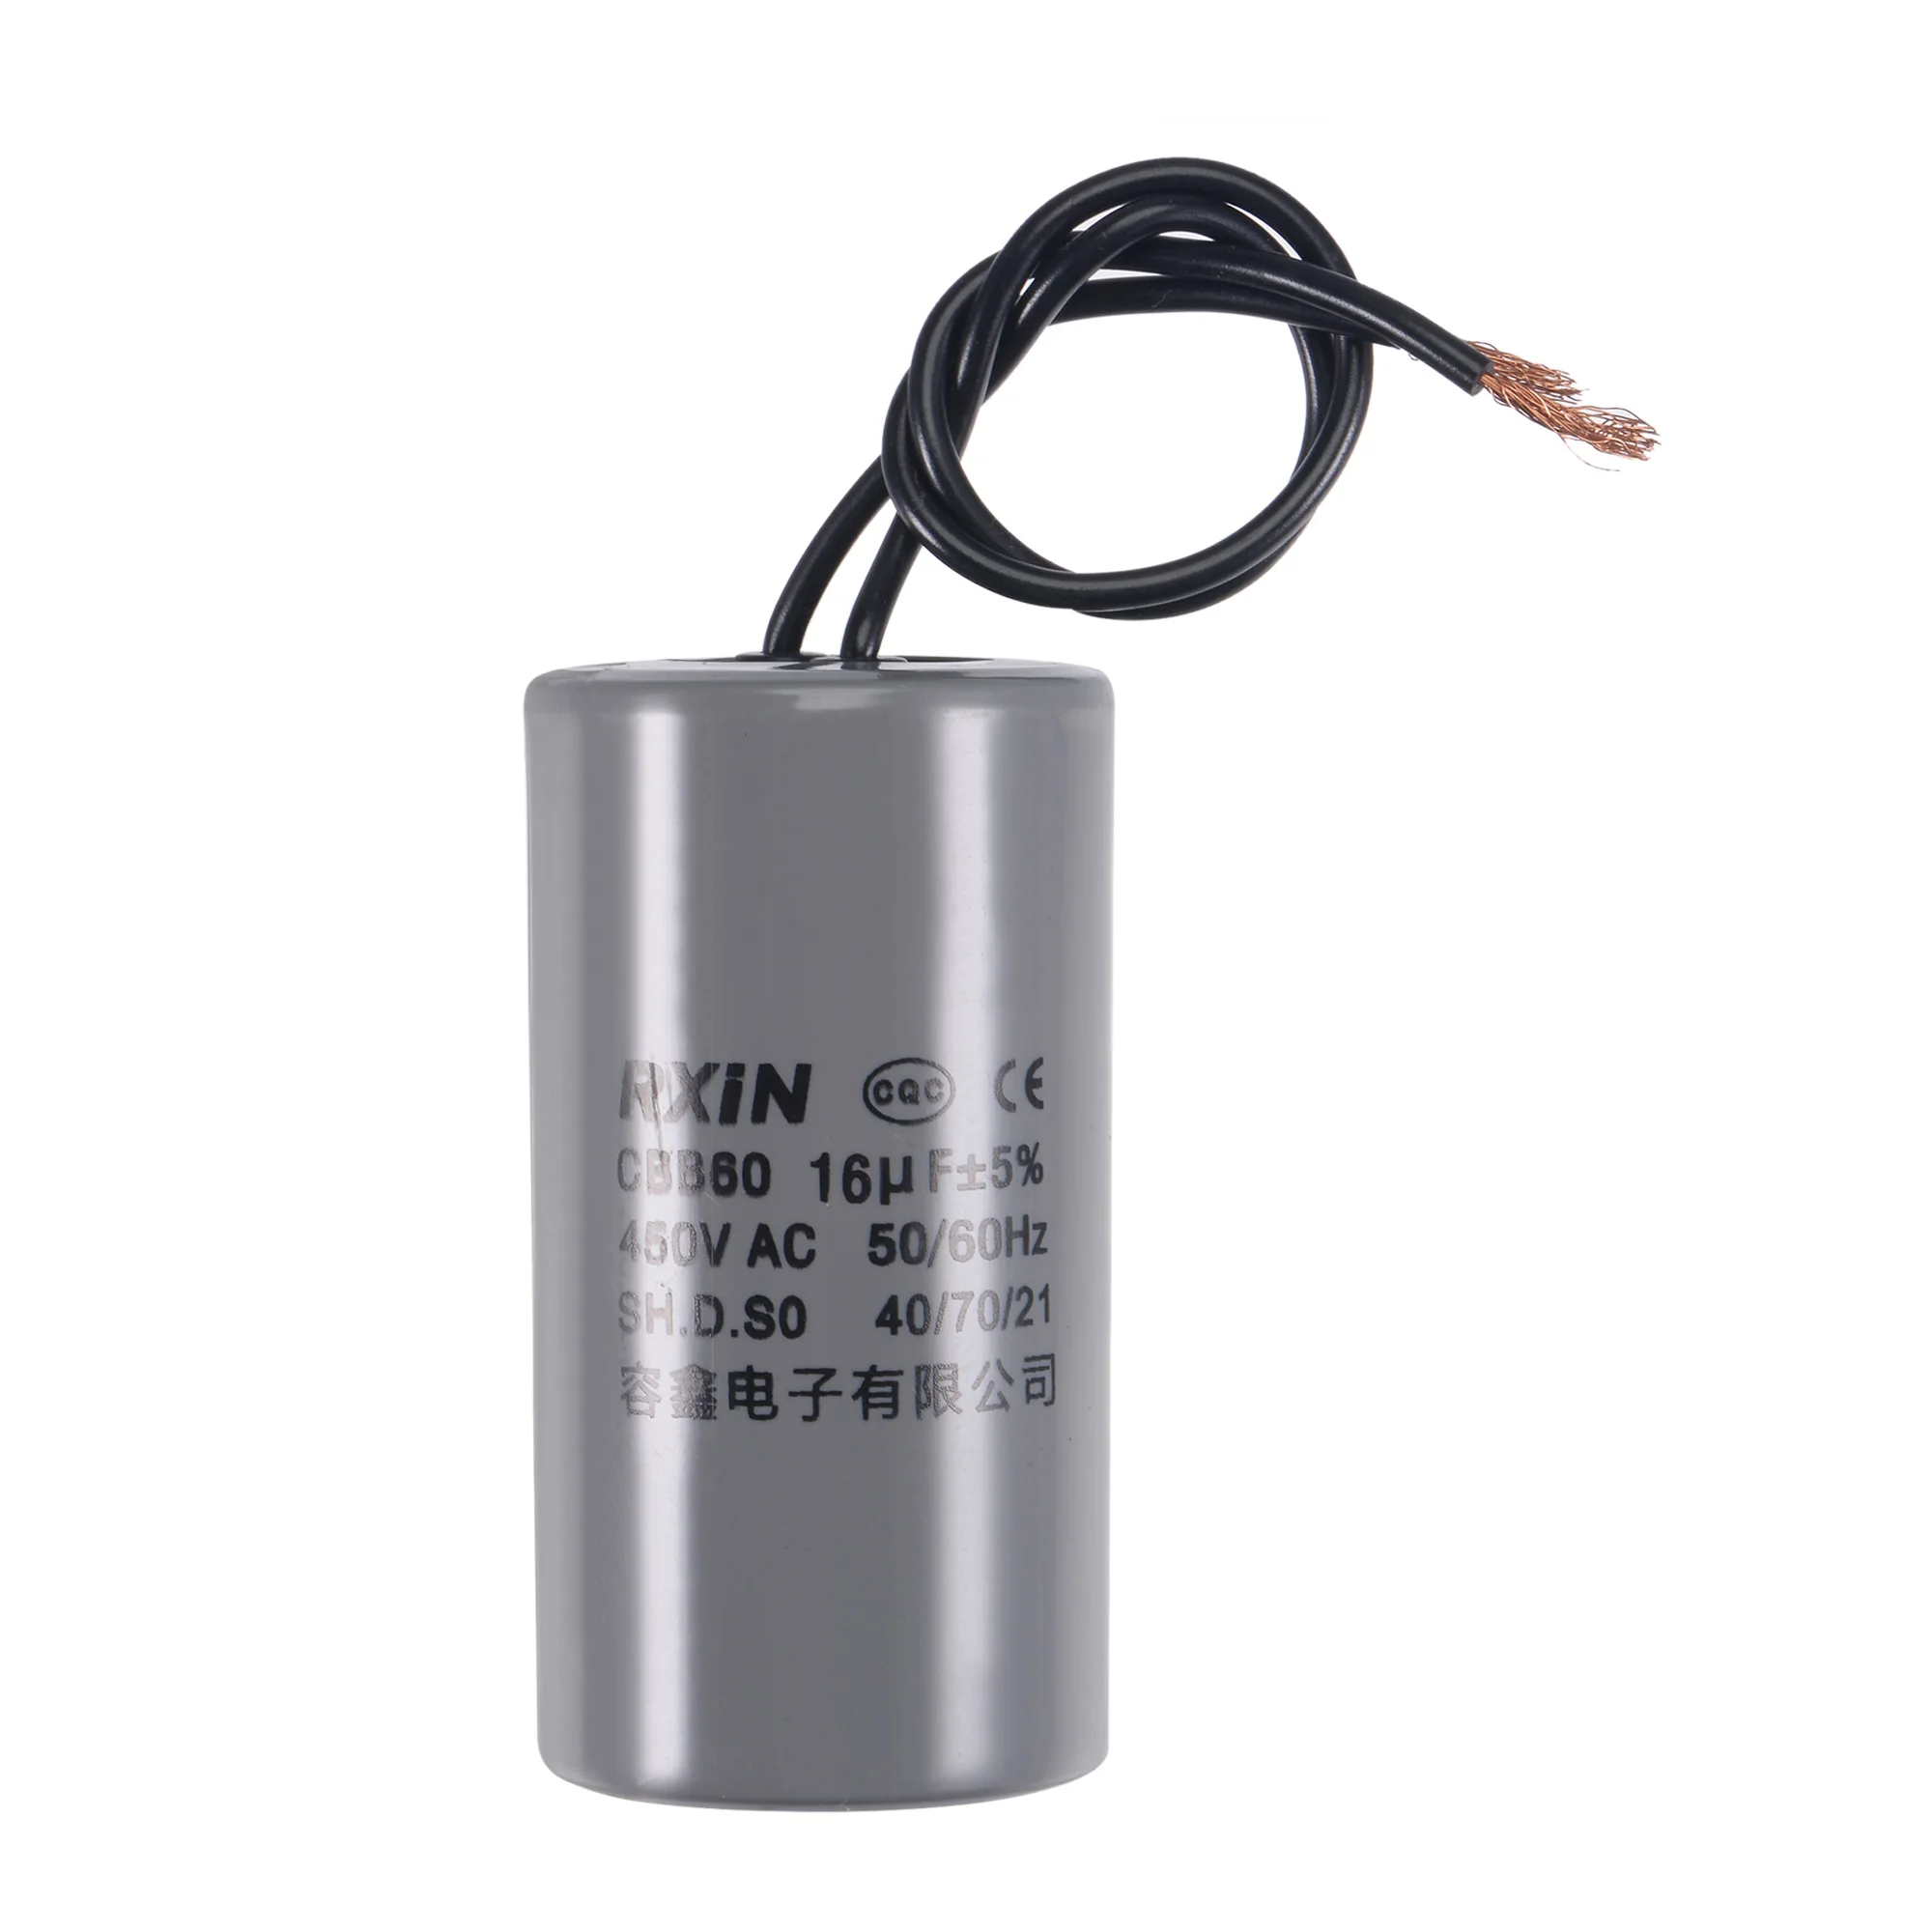 

Uxcell CBB60 Run Capacitor 16uF 450V AC 2 Wires 50/60Hz Cylinder 74x38mm for Air Compressor Water Pump Motor